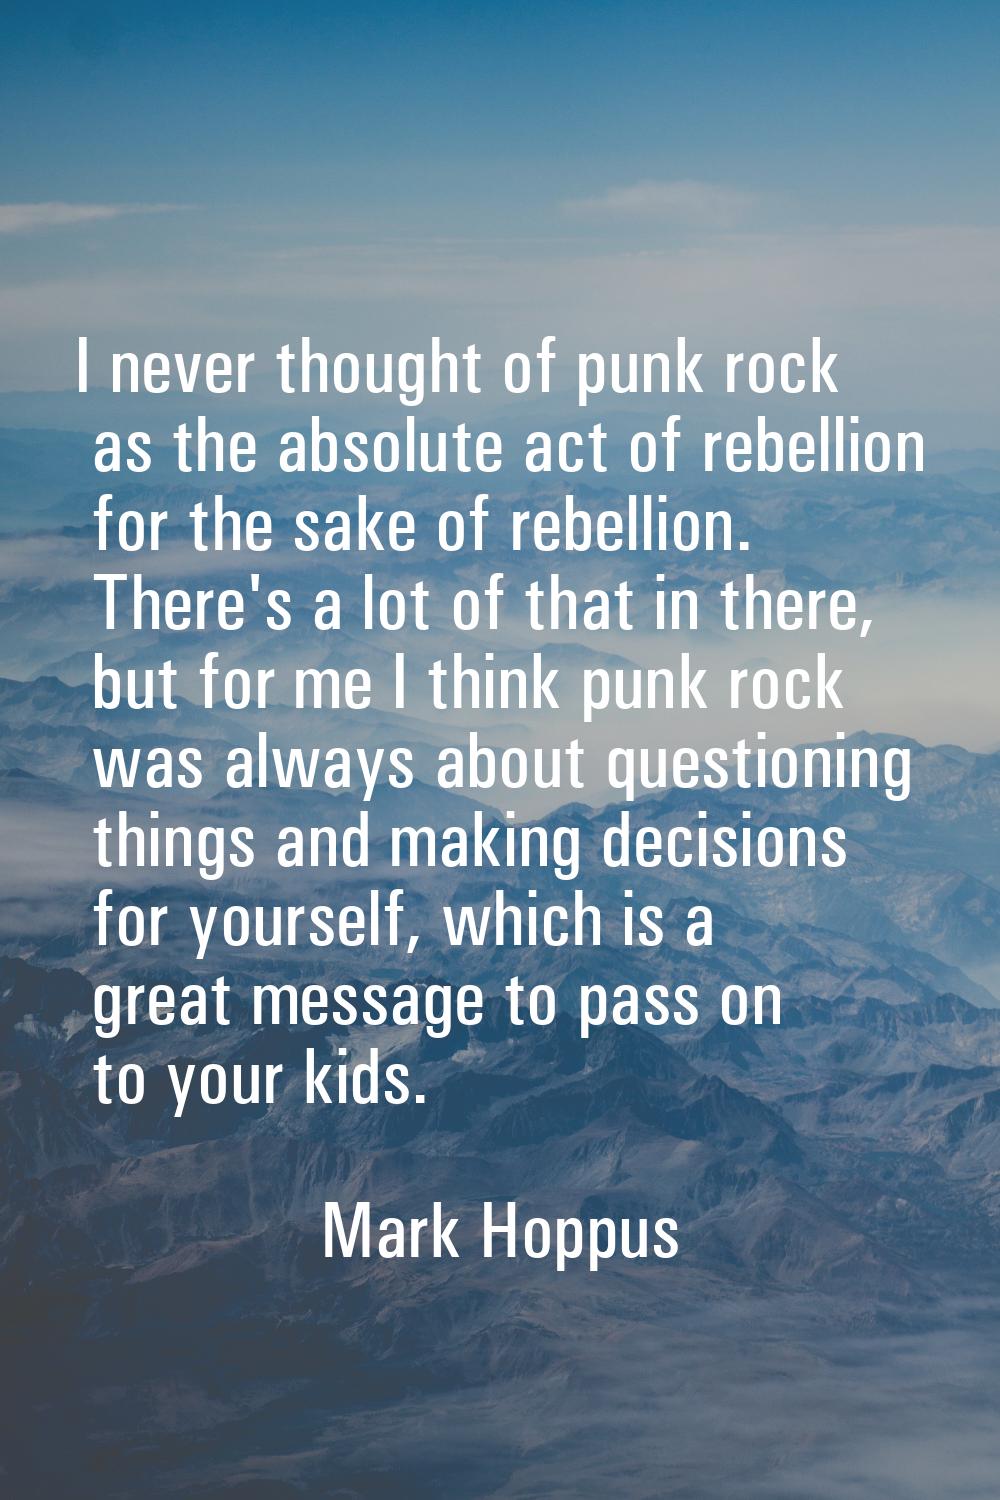 I never thought of punk rock as the absolute act of rebellion for the sake of rebellion. There's a 